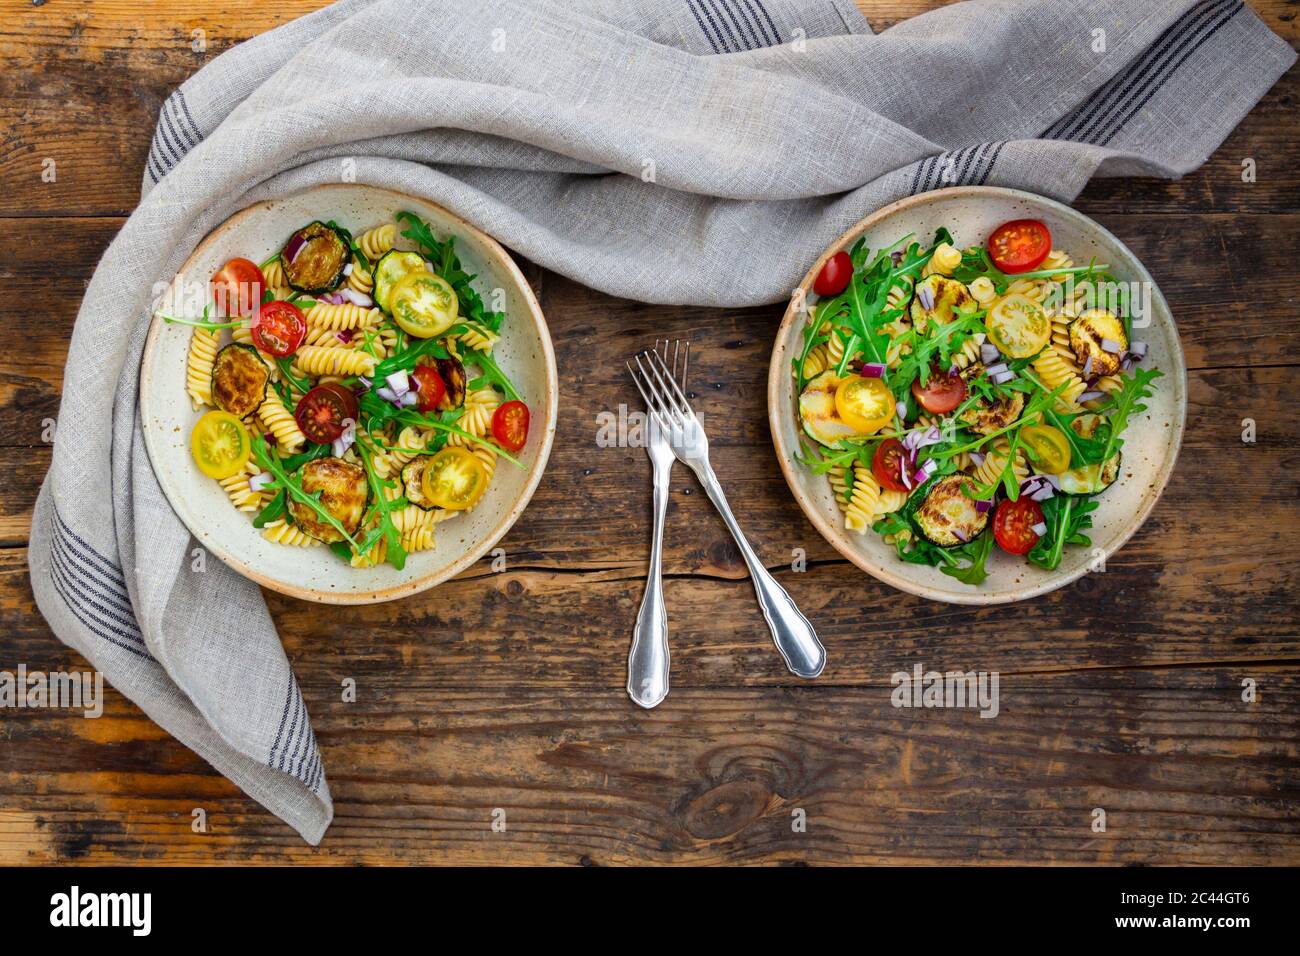 Two bowls of pasta salad with grilled zucchini, tomatoes, arugula, Spanish onion and balsamic vinegar Stock Photo